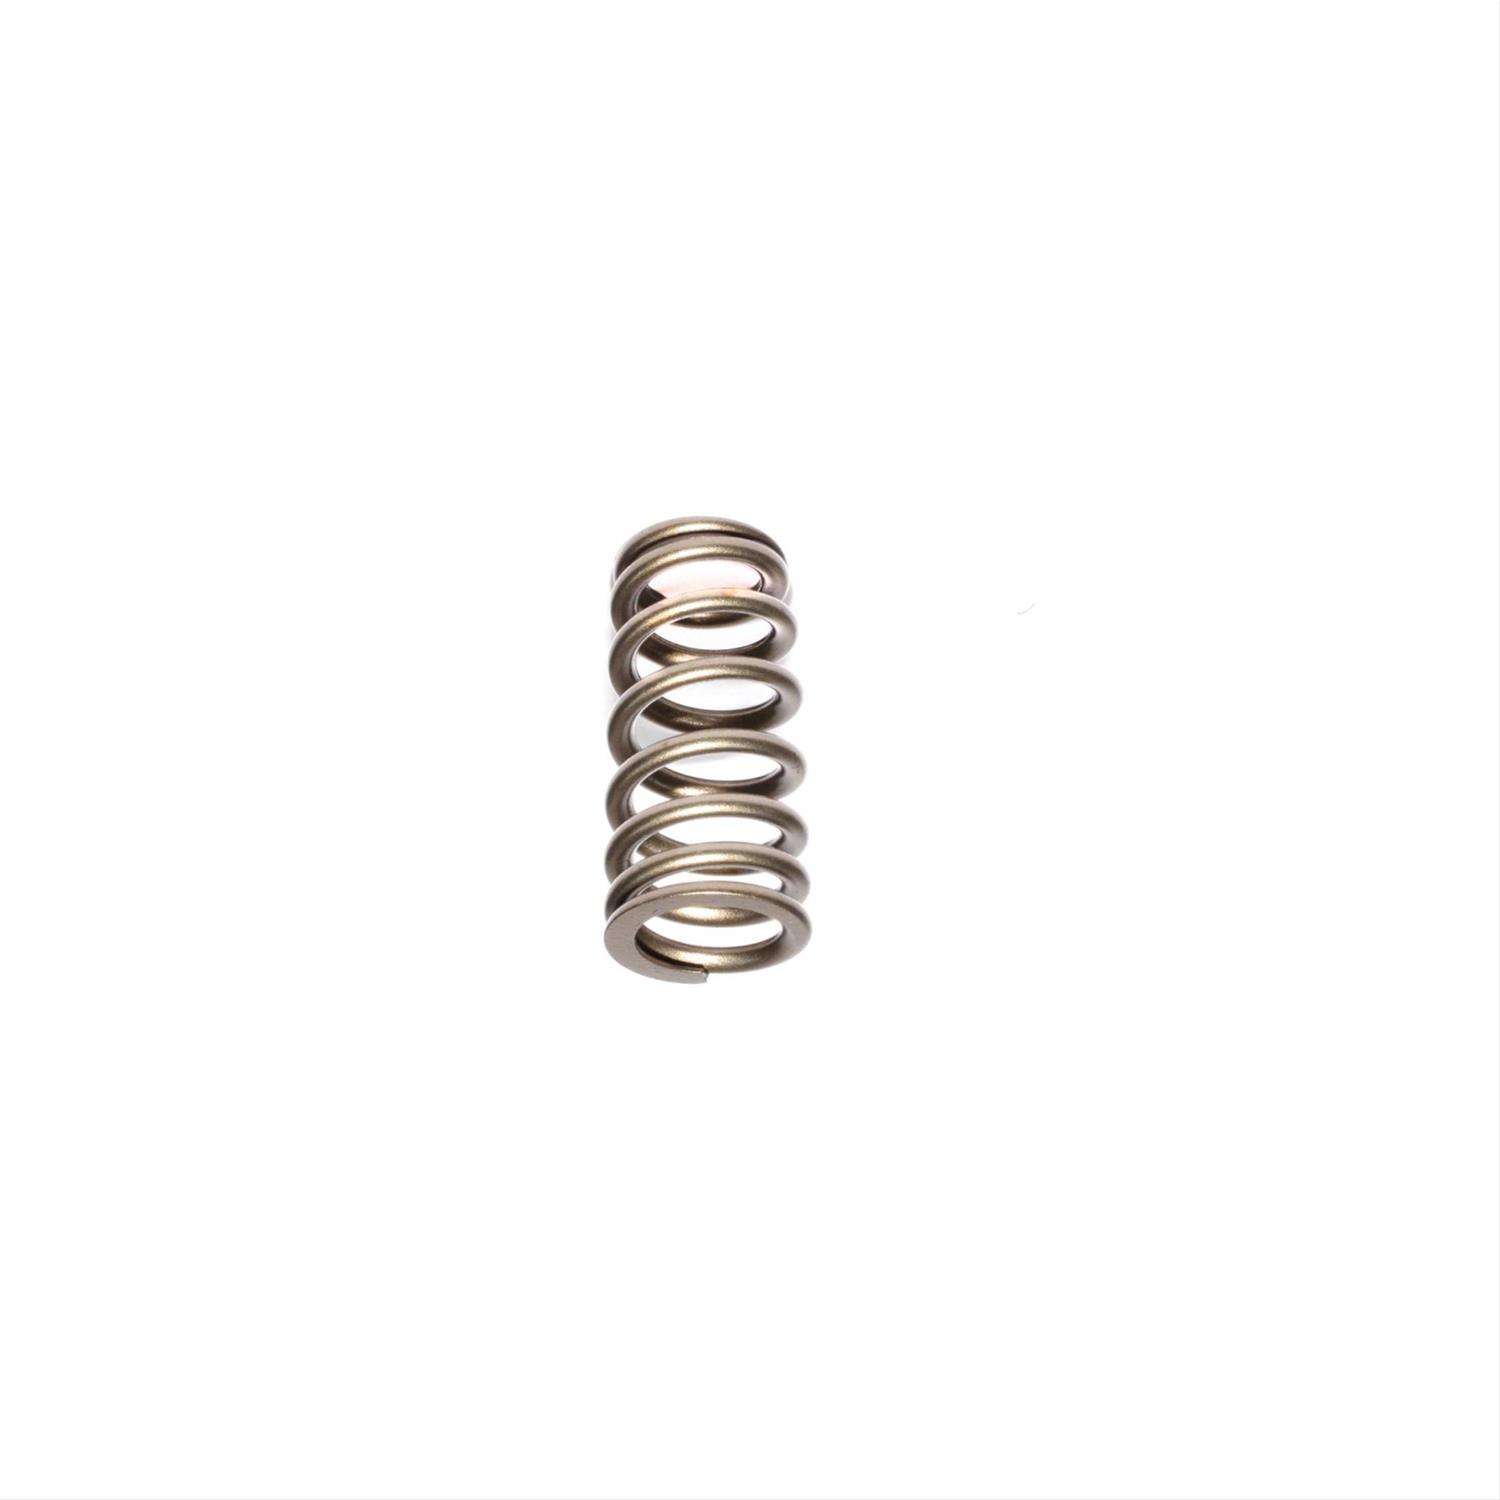 FORD 4.6L 4 VALVE BEEHIVE SPRING SINGLE .500 LIFT